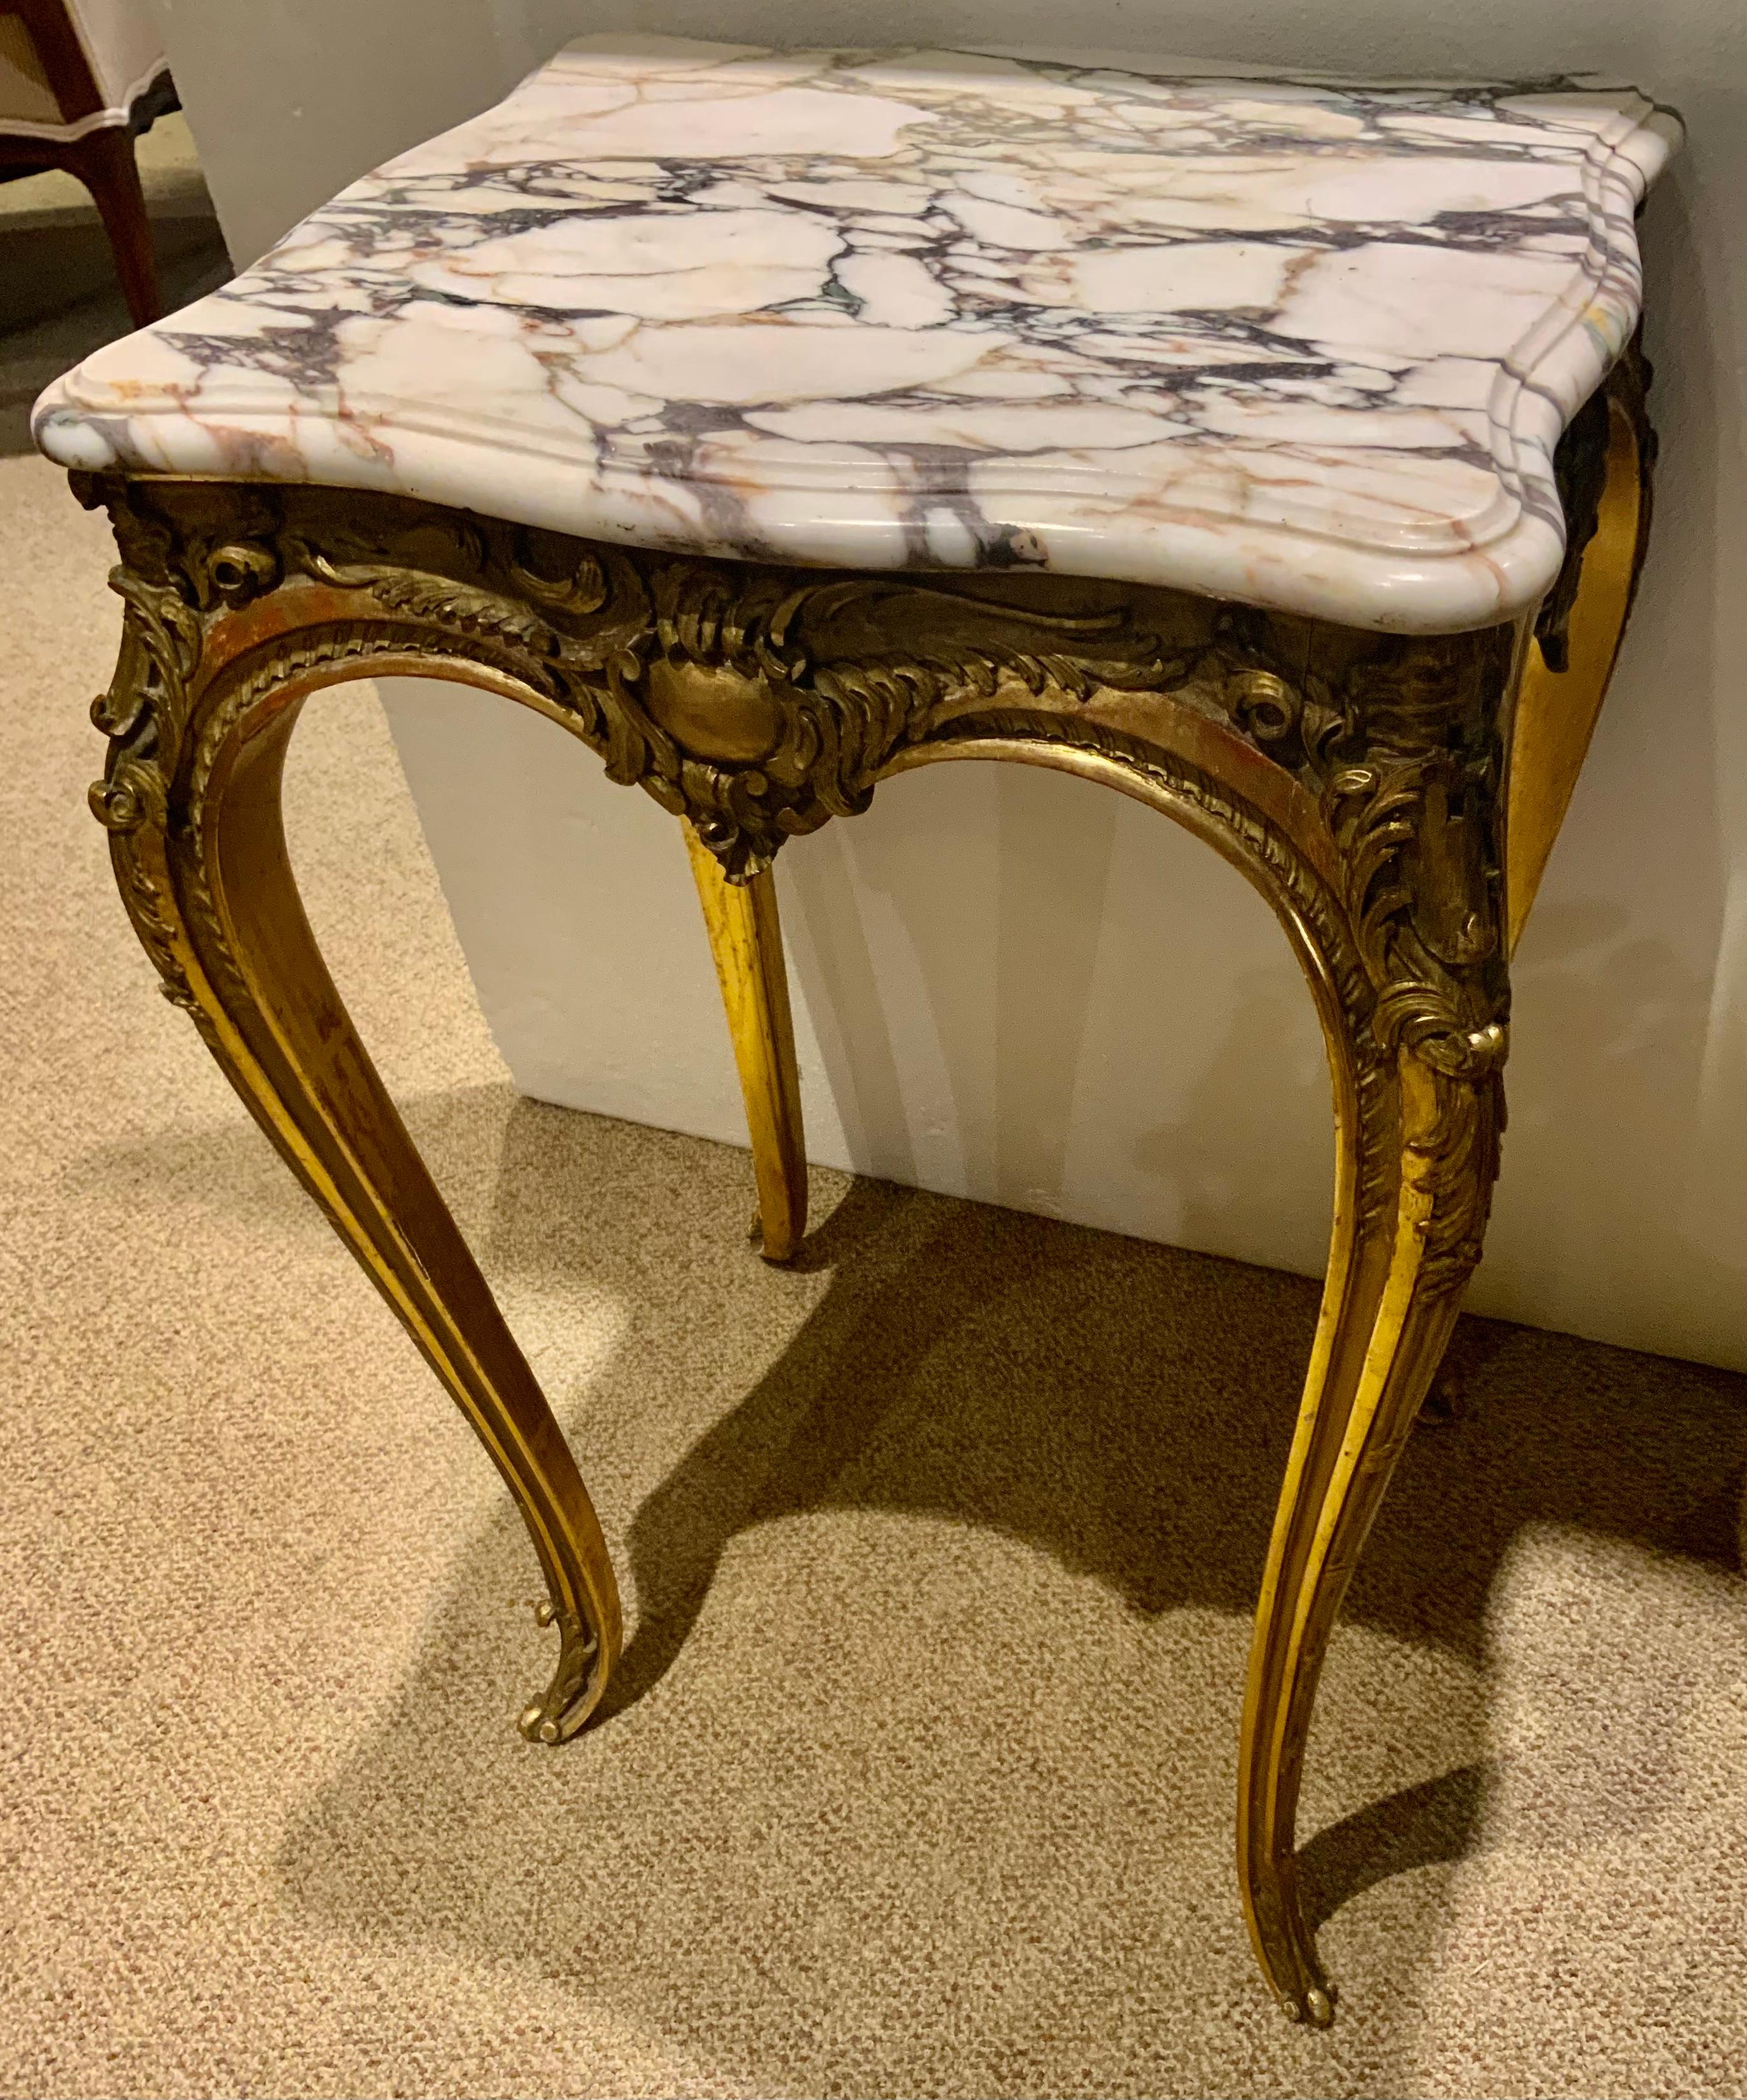 19th Century Louis XV-Style Gilt Wood Occasional Table with White/Cream Hue Marble Top For Sale